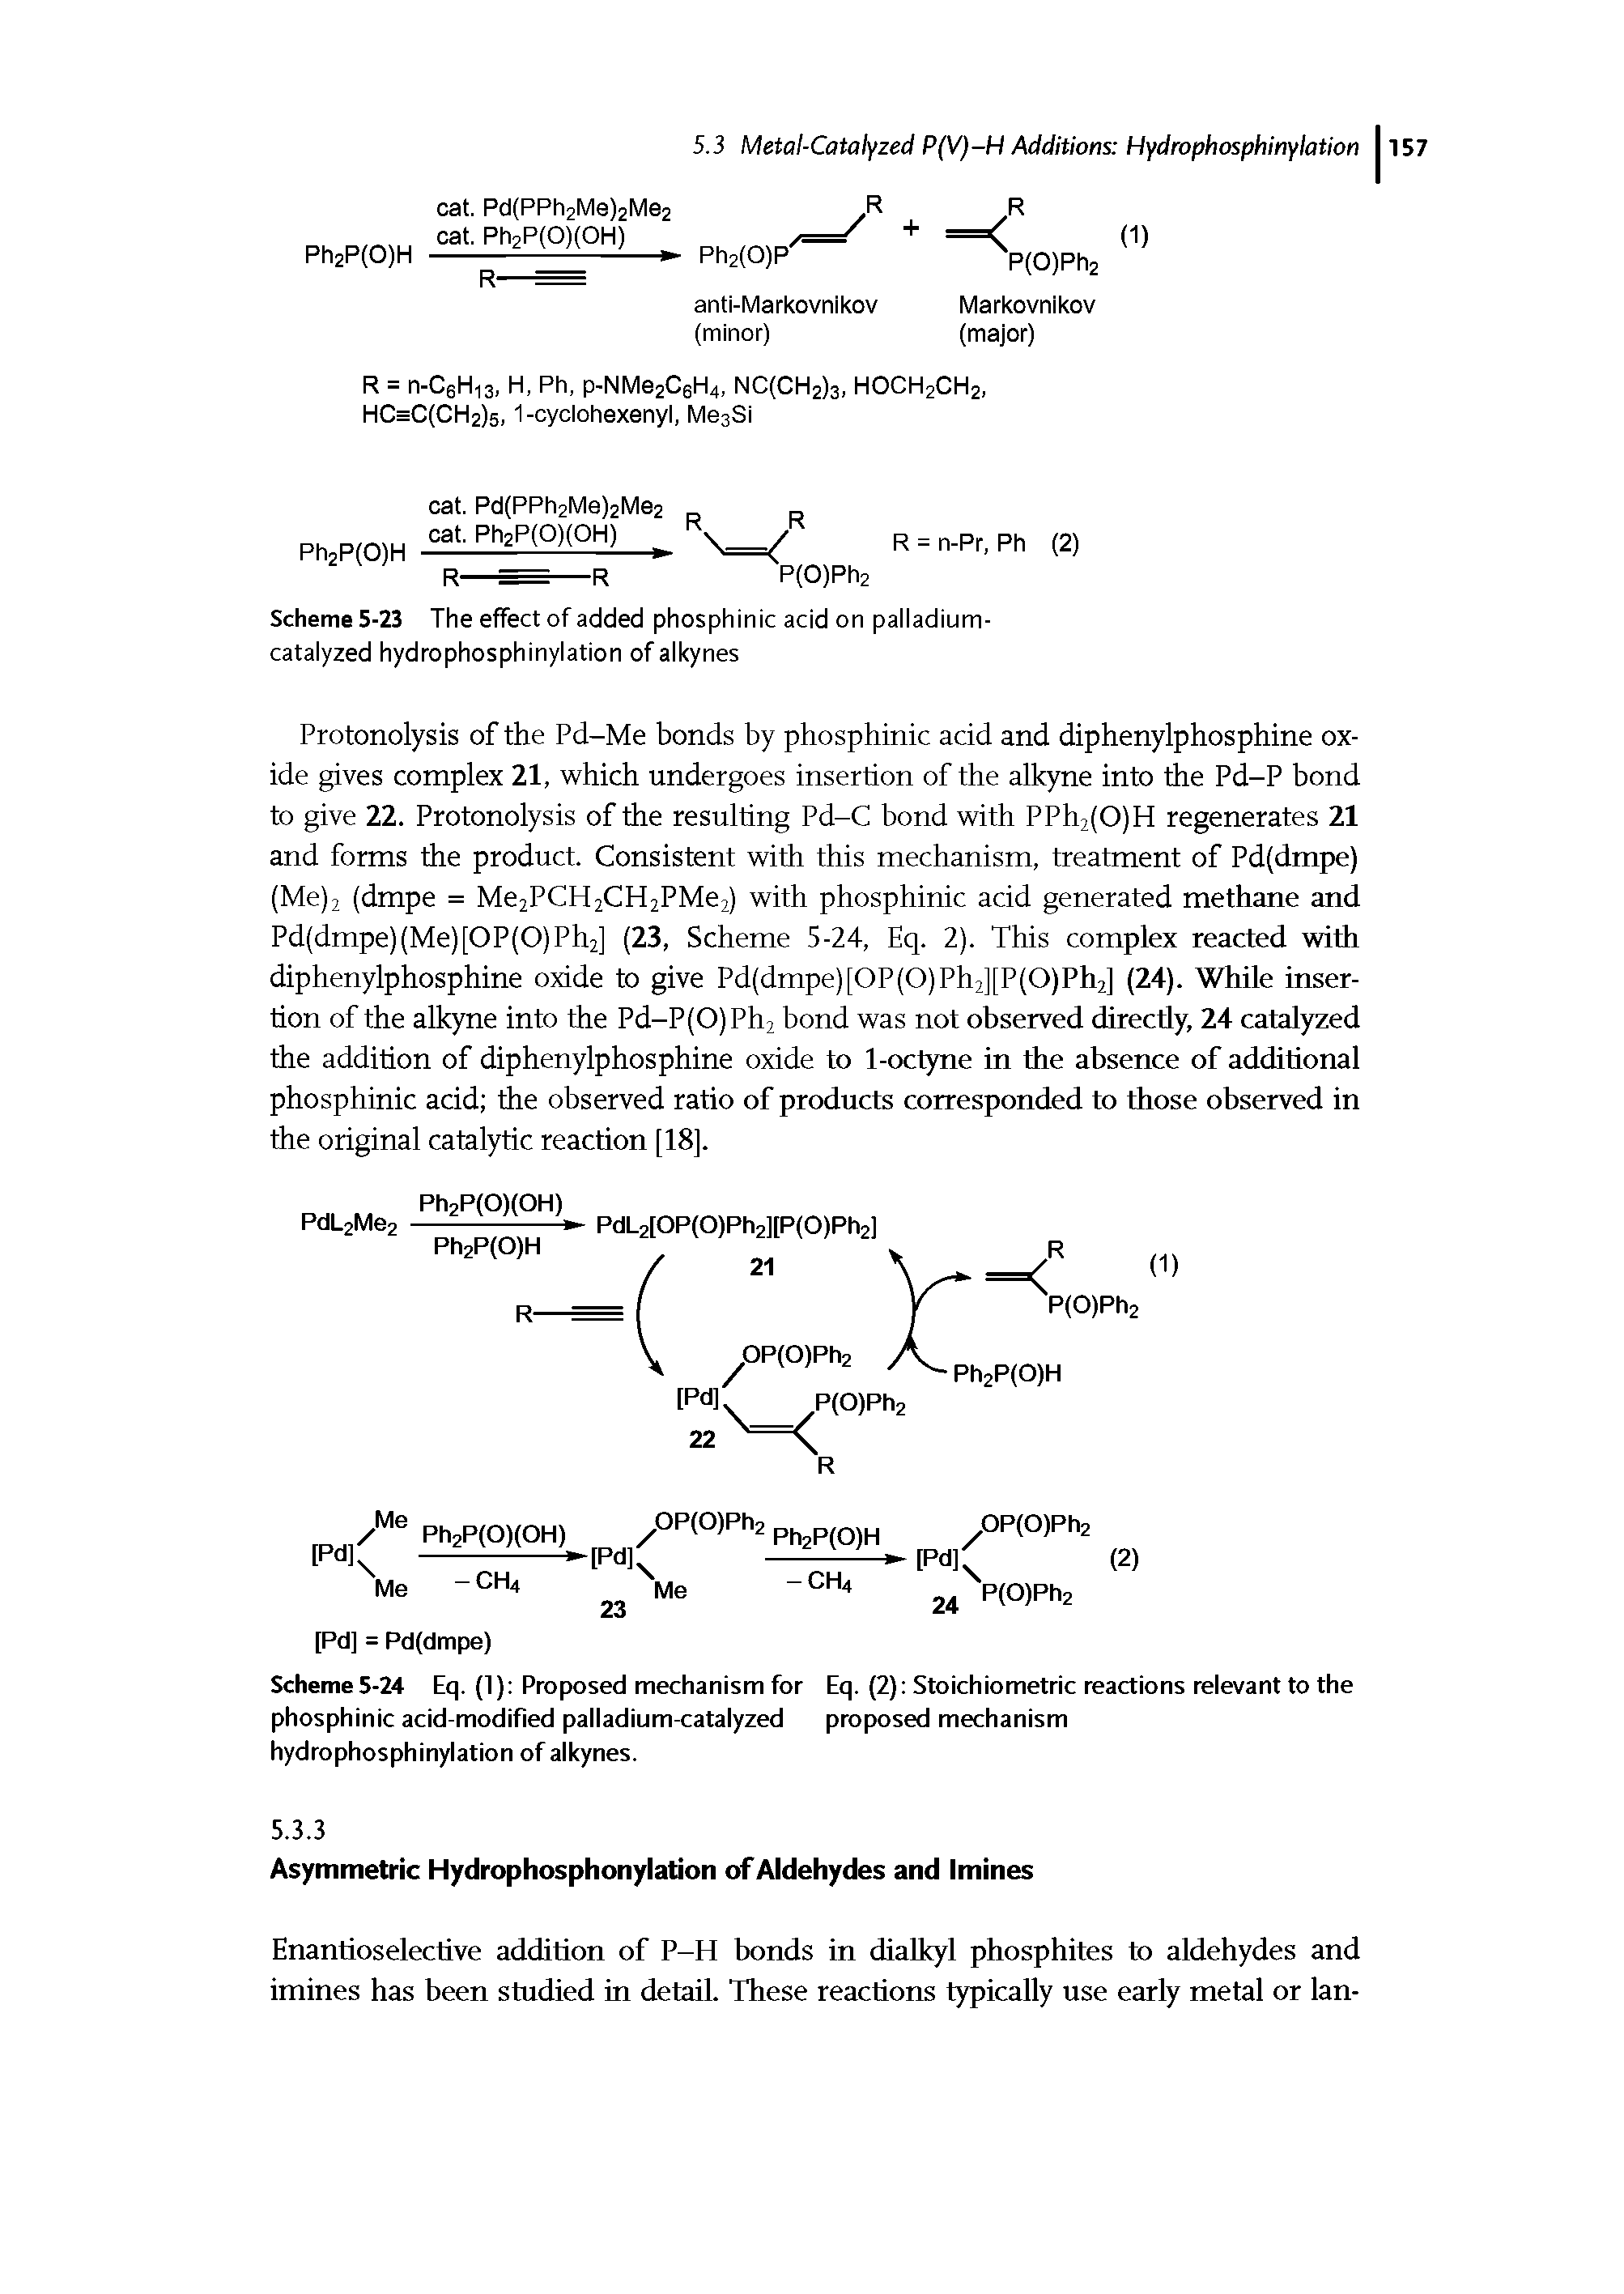 Scheme5-24 Eq. (1) Proposed mechanism for Eq. (2) Stoichiometric reactions relevant to the phosphinic acid-modified palladium-catalyzed proposed mechanism hydrophosphinylation of alkynes.